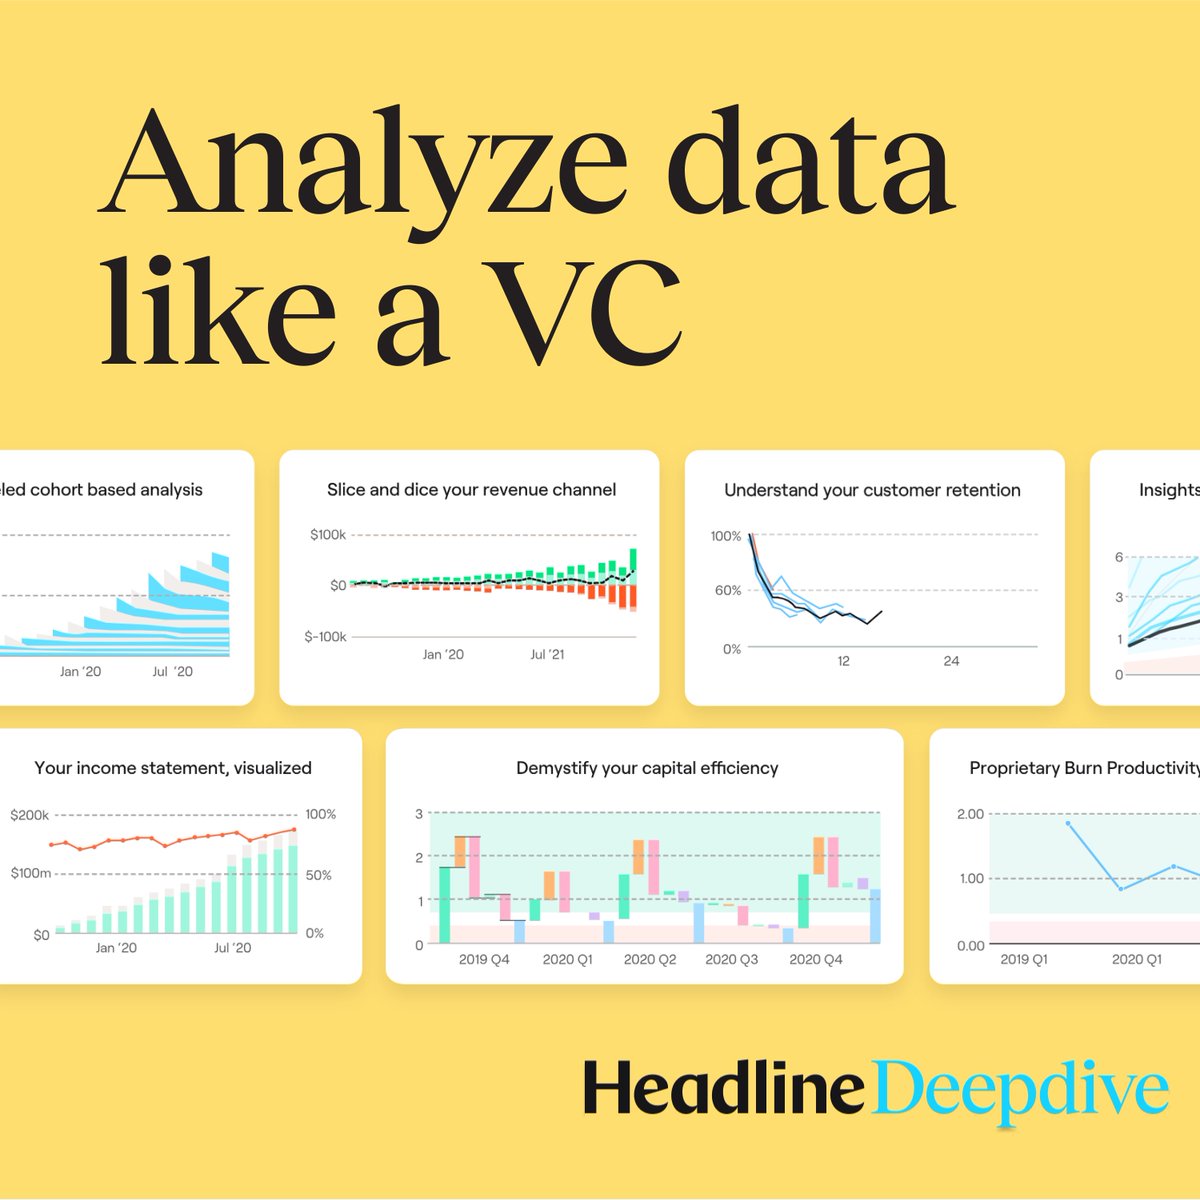 Before you raise, see how your business runs. We have just released a free tool to help anyone calculate the top 5 metrics VCs care about: headline.com/blog-latest/ar…